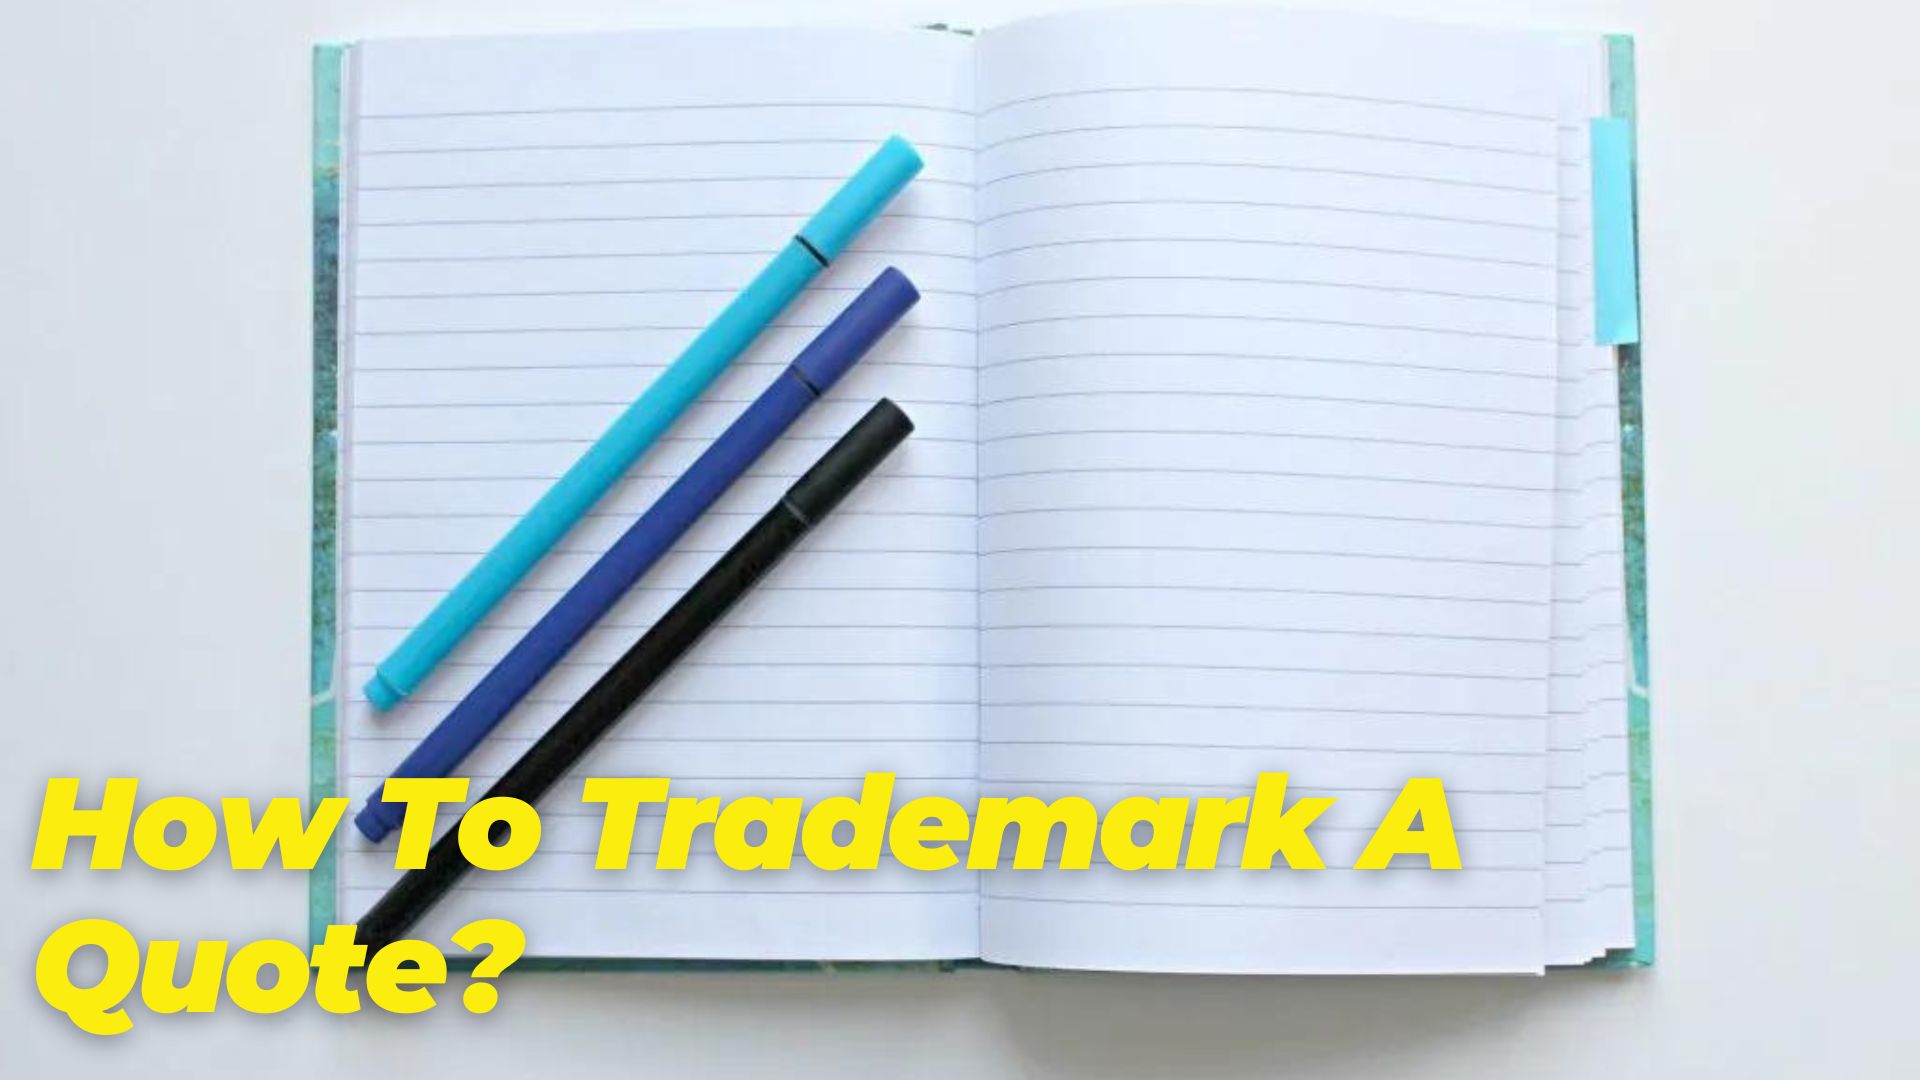 How To Trademark A Quote?